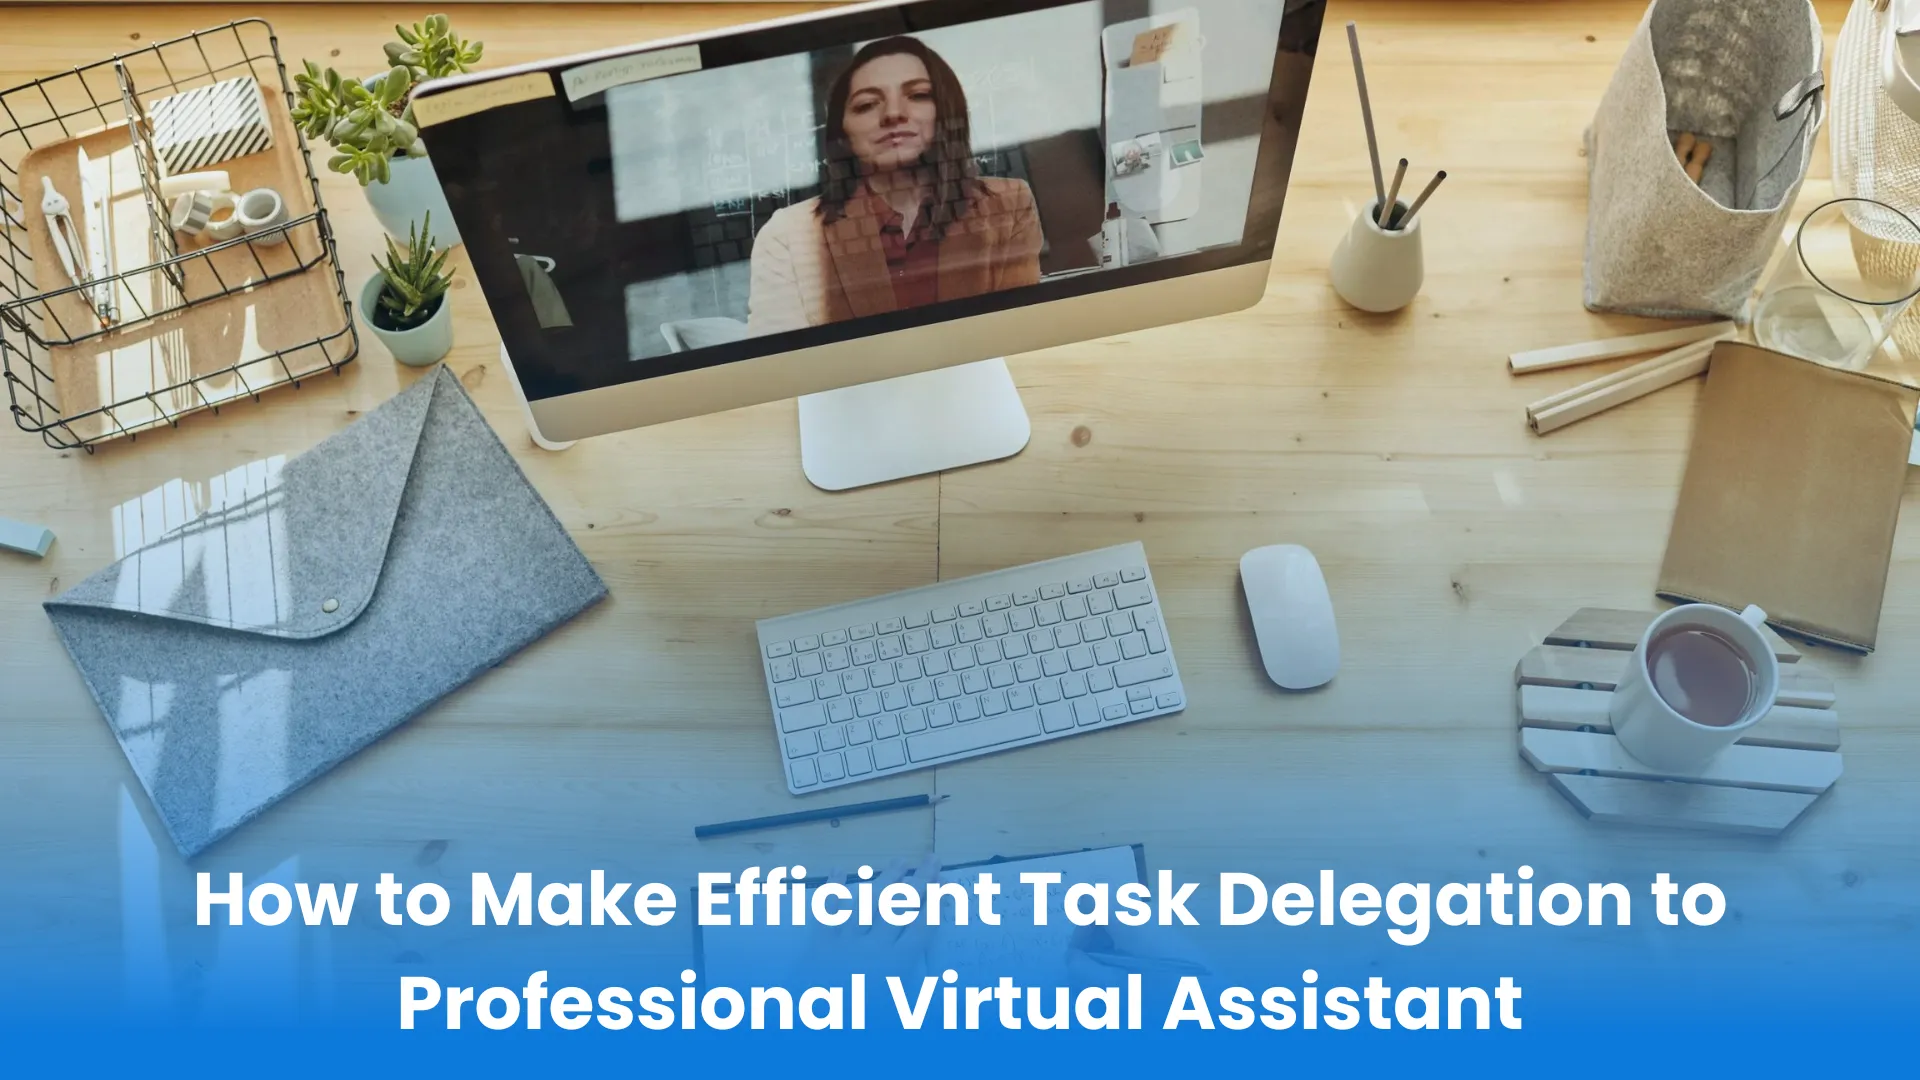 How to Make Efficient Task Delegation to Professional Virtual Assistant